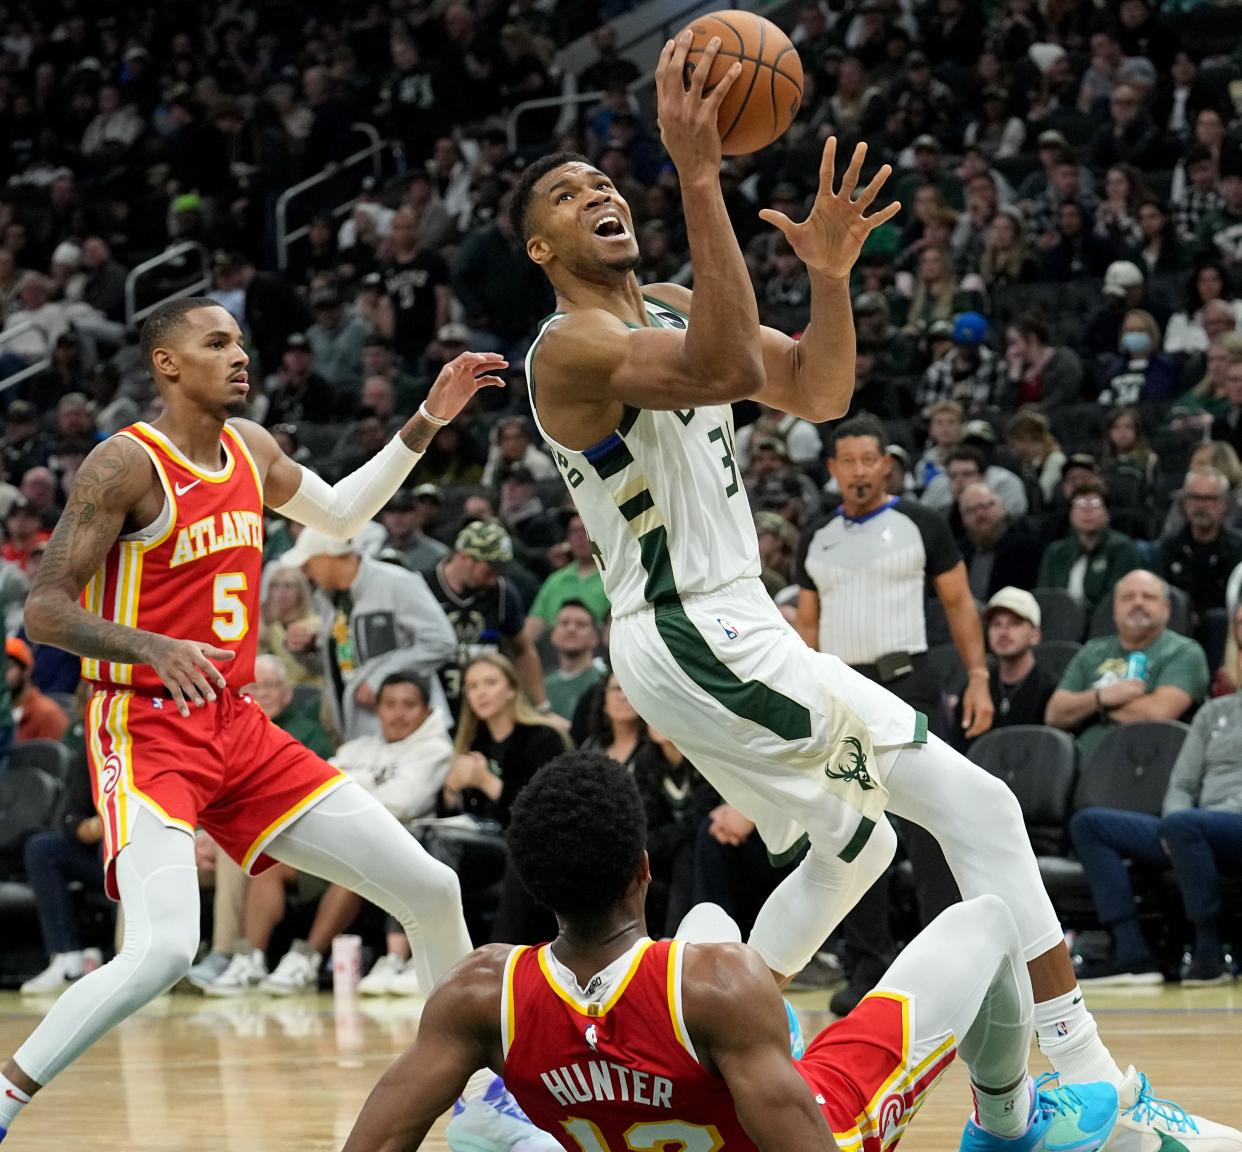 Milwaukee Bucks forward Giannis Antetokounmpo (34) fouls Atlanta Hawks forward De'Andre Hunter (12) during the second half of their game Sunday, October 29, 2023 at Fiserv Forum in Milwaukee, Wisconsin. The Atlanta hawks beat the Milwaukee Bucks 127-110.